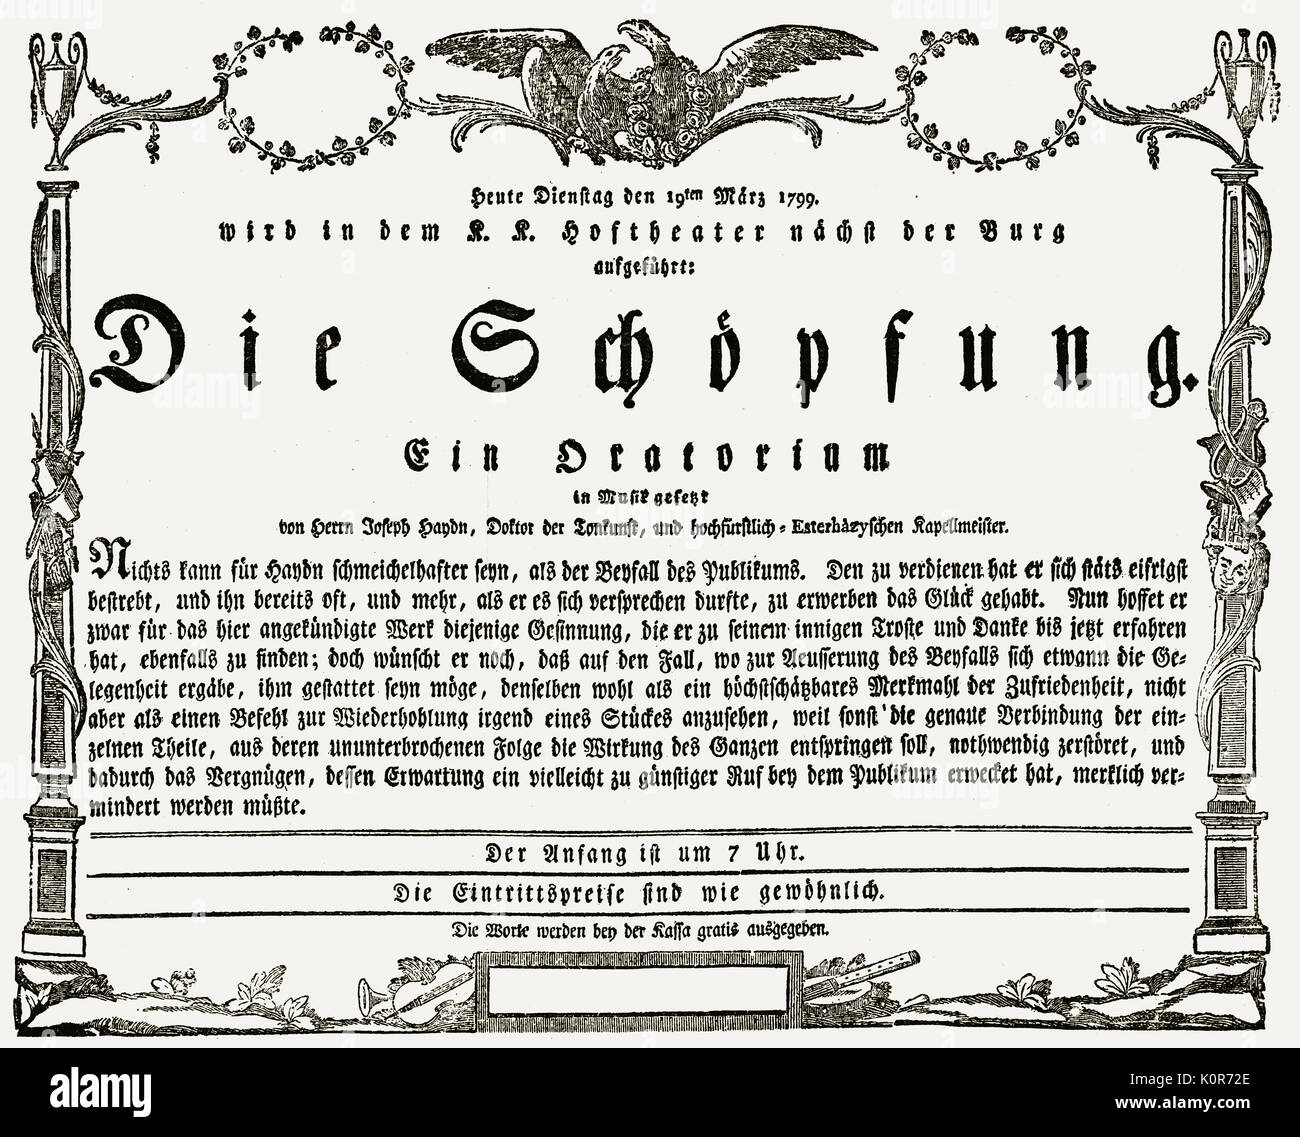 Franz Joseph Haydn - announcement of first performance of 'Die Schöpfung' (or Schoepfung), at the Hoftheater (Imperial Court Theatre) on 19 March 1799. 'Creation'.  FJH, Austrian composer: 31 March 1732 - 31 May 1809. Stock Photo